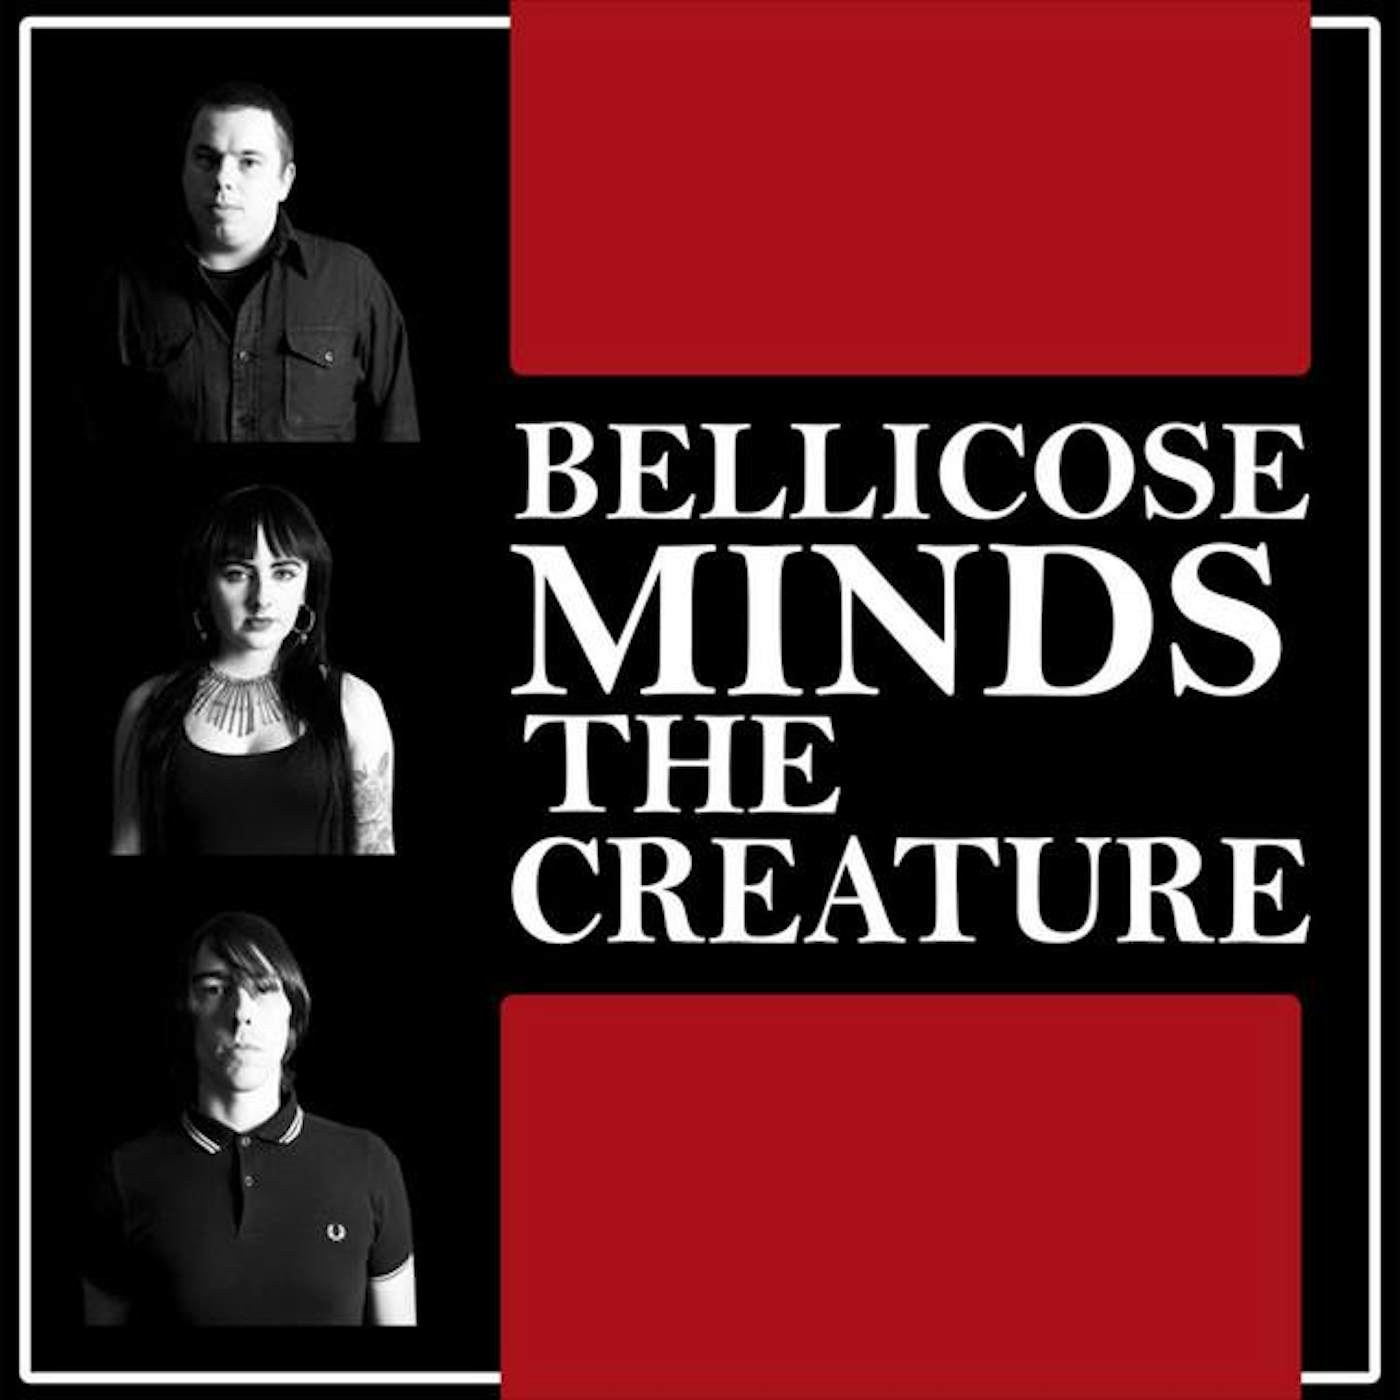 The Bellicose Minds